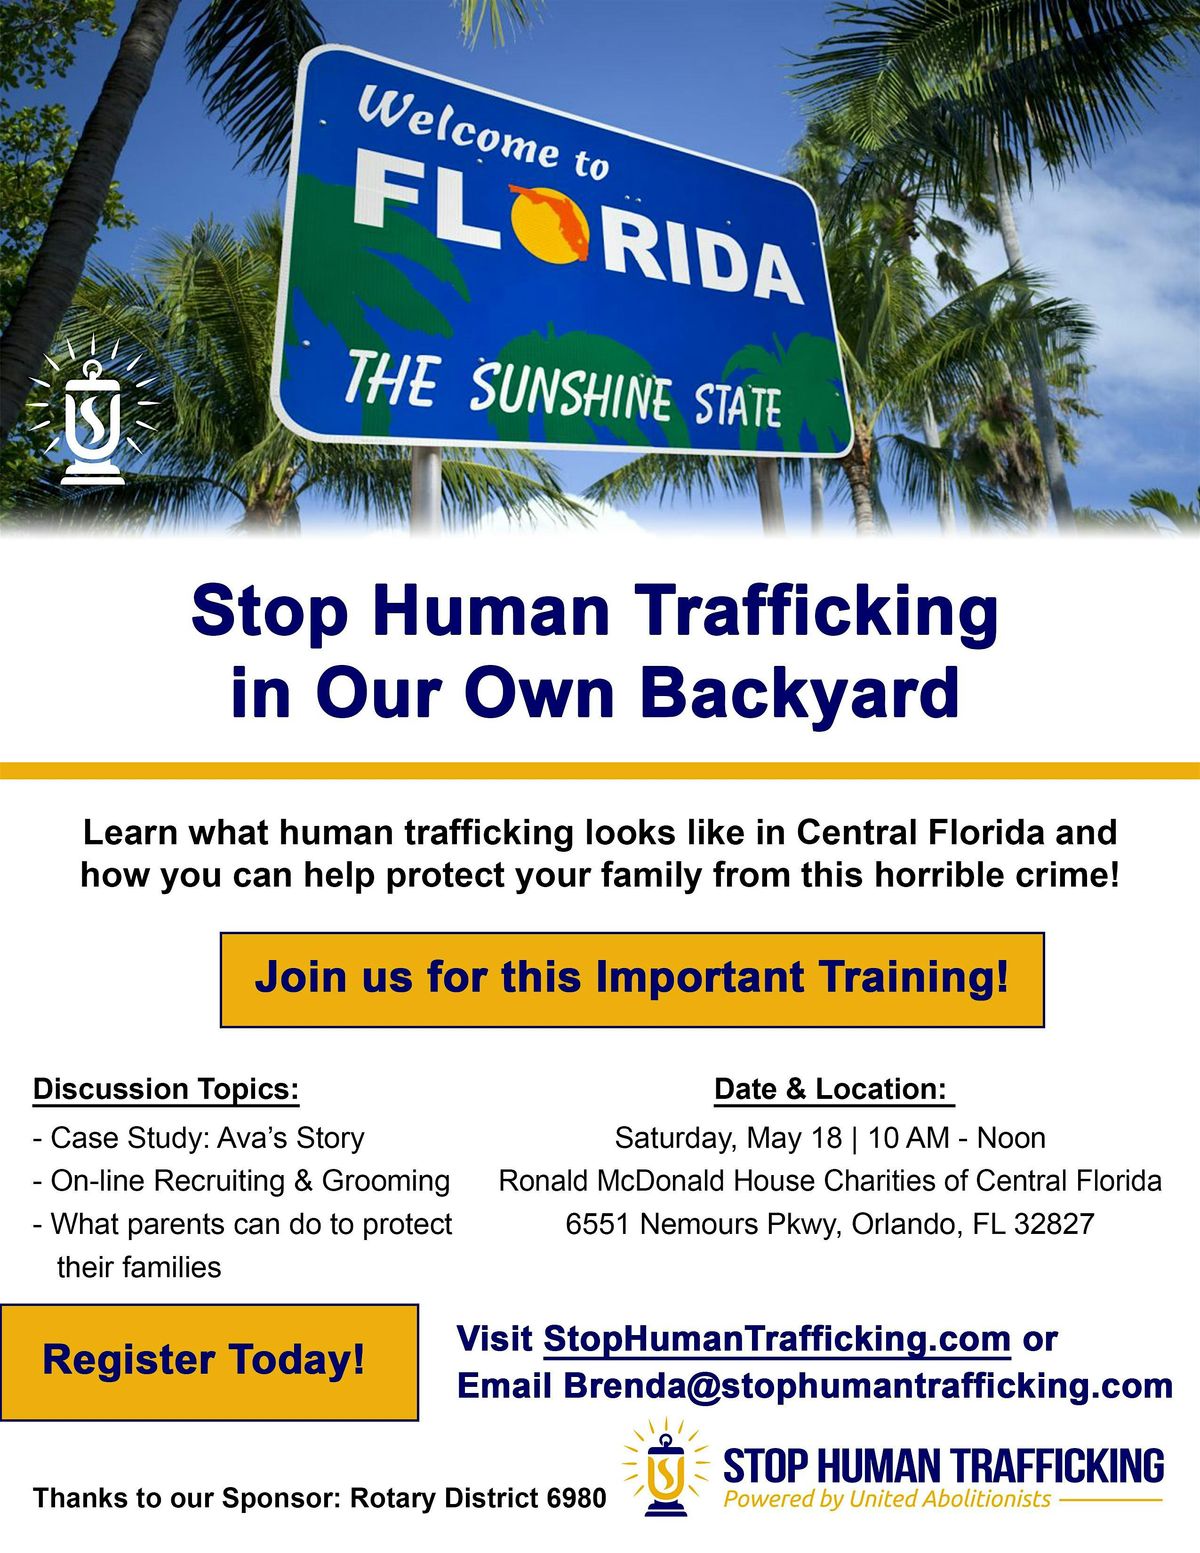 Stop Human Trafficking in Our Own Backyard